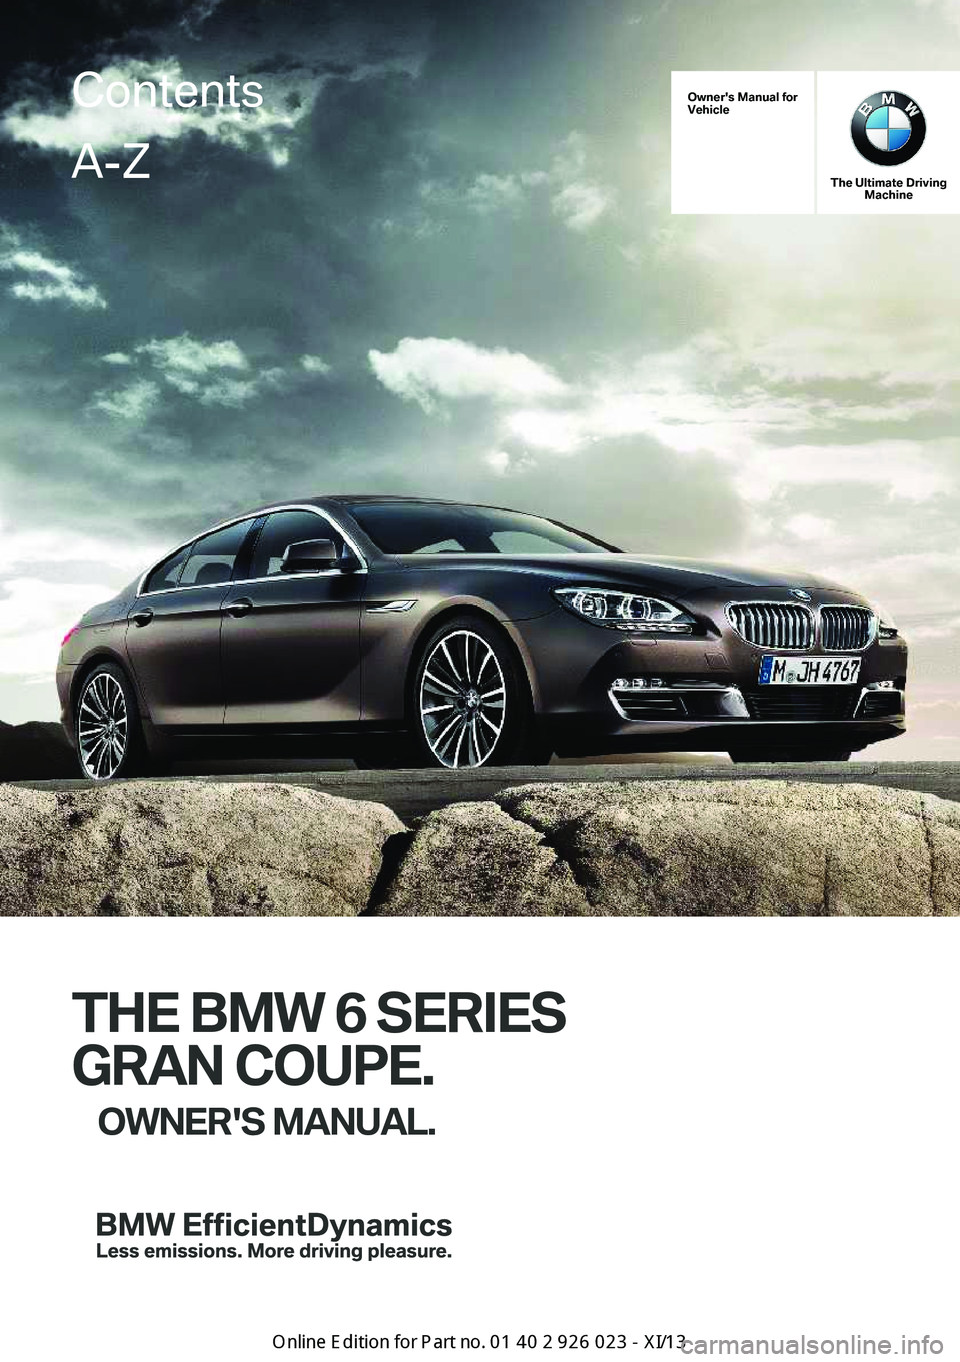 BMW 6 SERIES GRAN COUPE 2013 F12 Owners Manual Owner's Manual for
Vehicle
The Ultimate Driving Machine
THE BMW 6 SERIES
GRAN COUPE. OWNER'S MANUAL.
ContentsA-Z
Online Edition for Part no. 01 40 2 909 877 - VI/13   